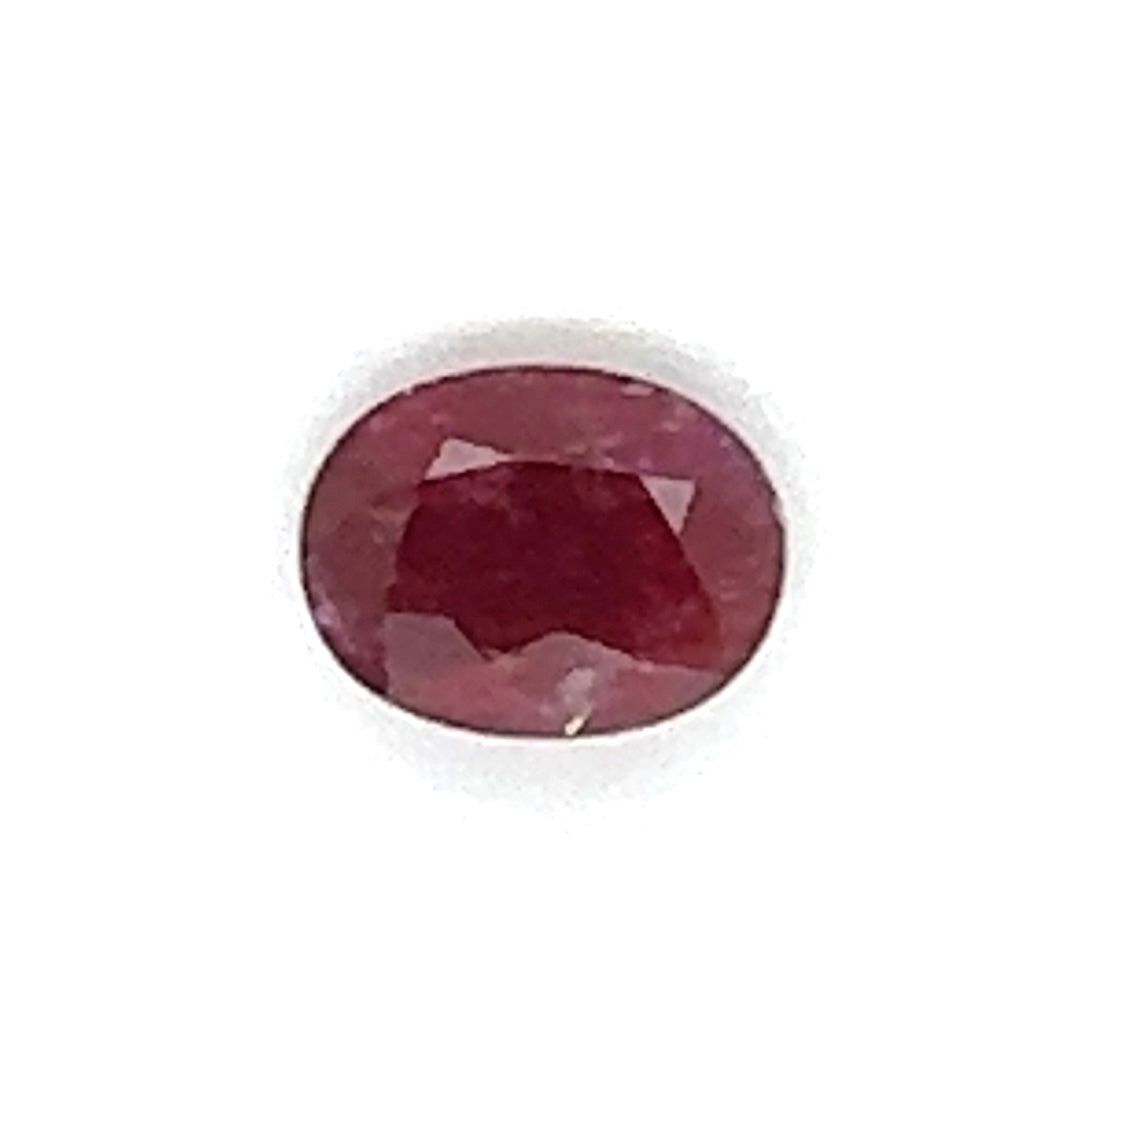 5.04cts Mozambique Ruby (no heat) Natural Stone